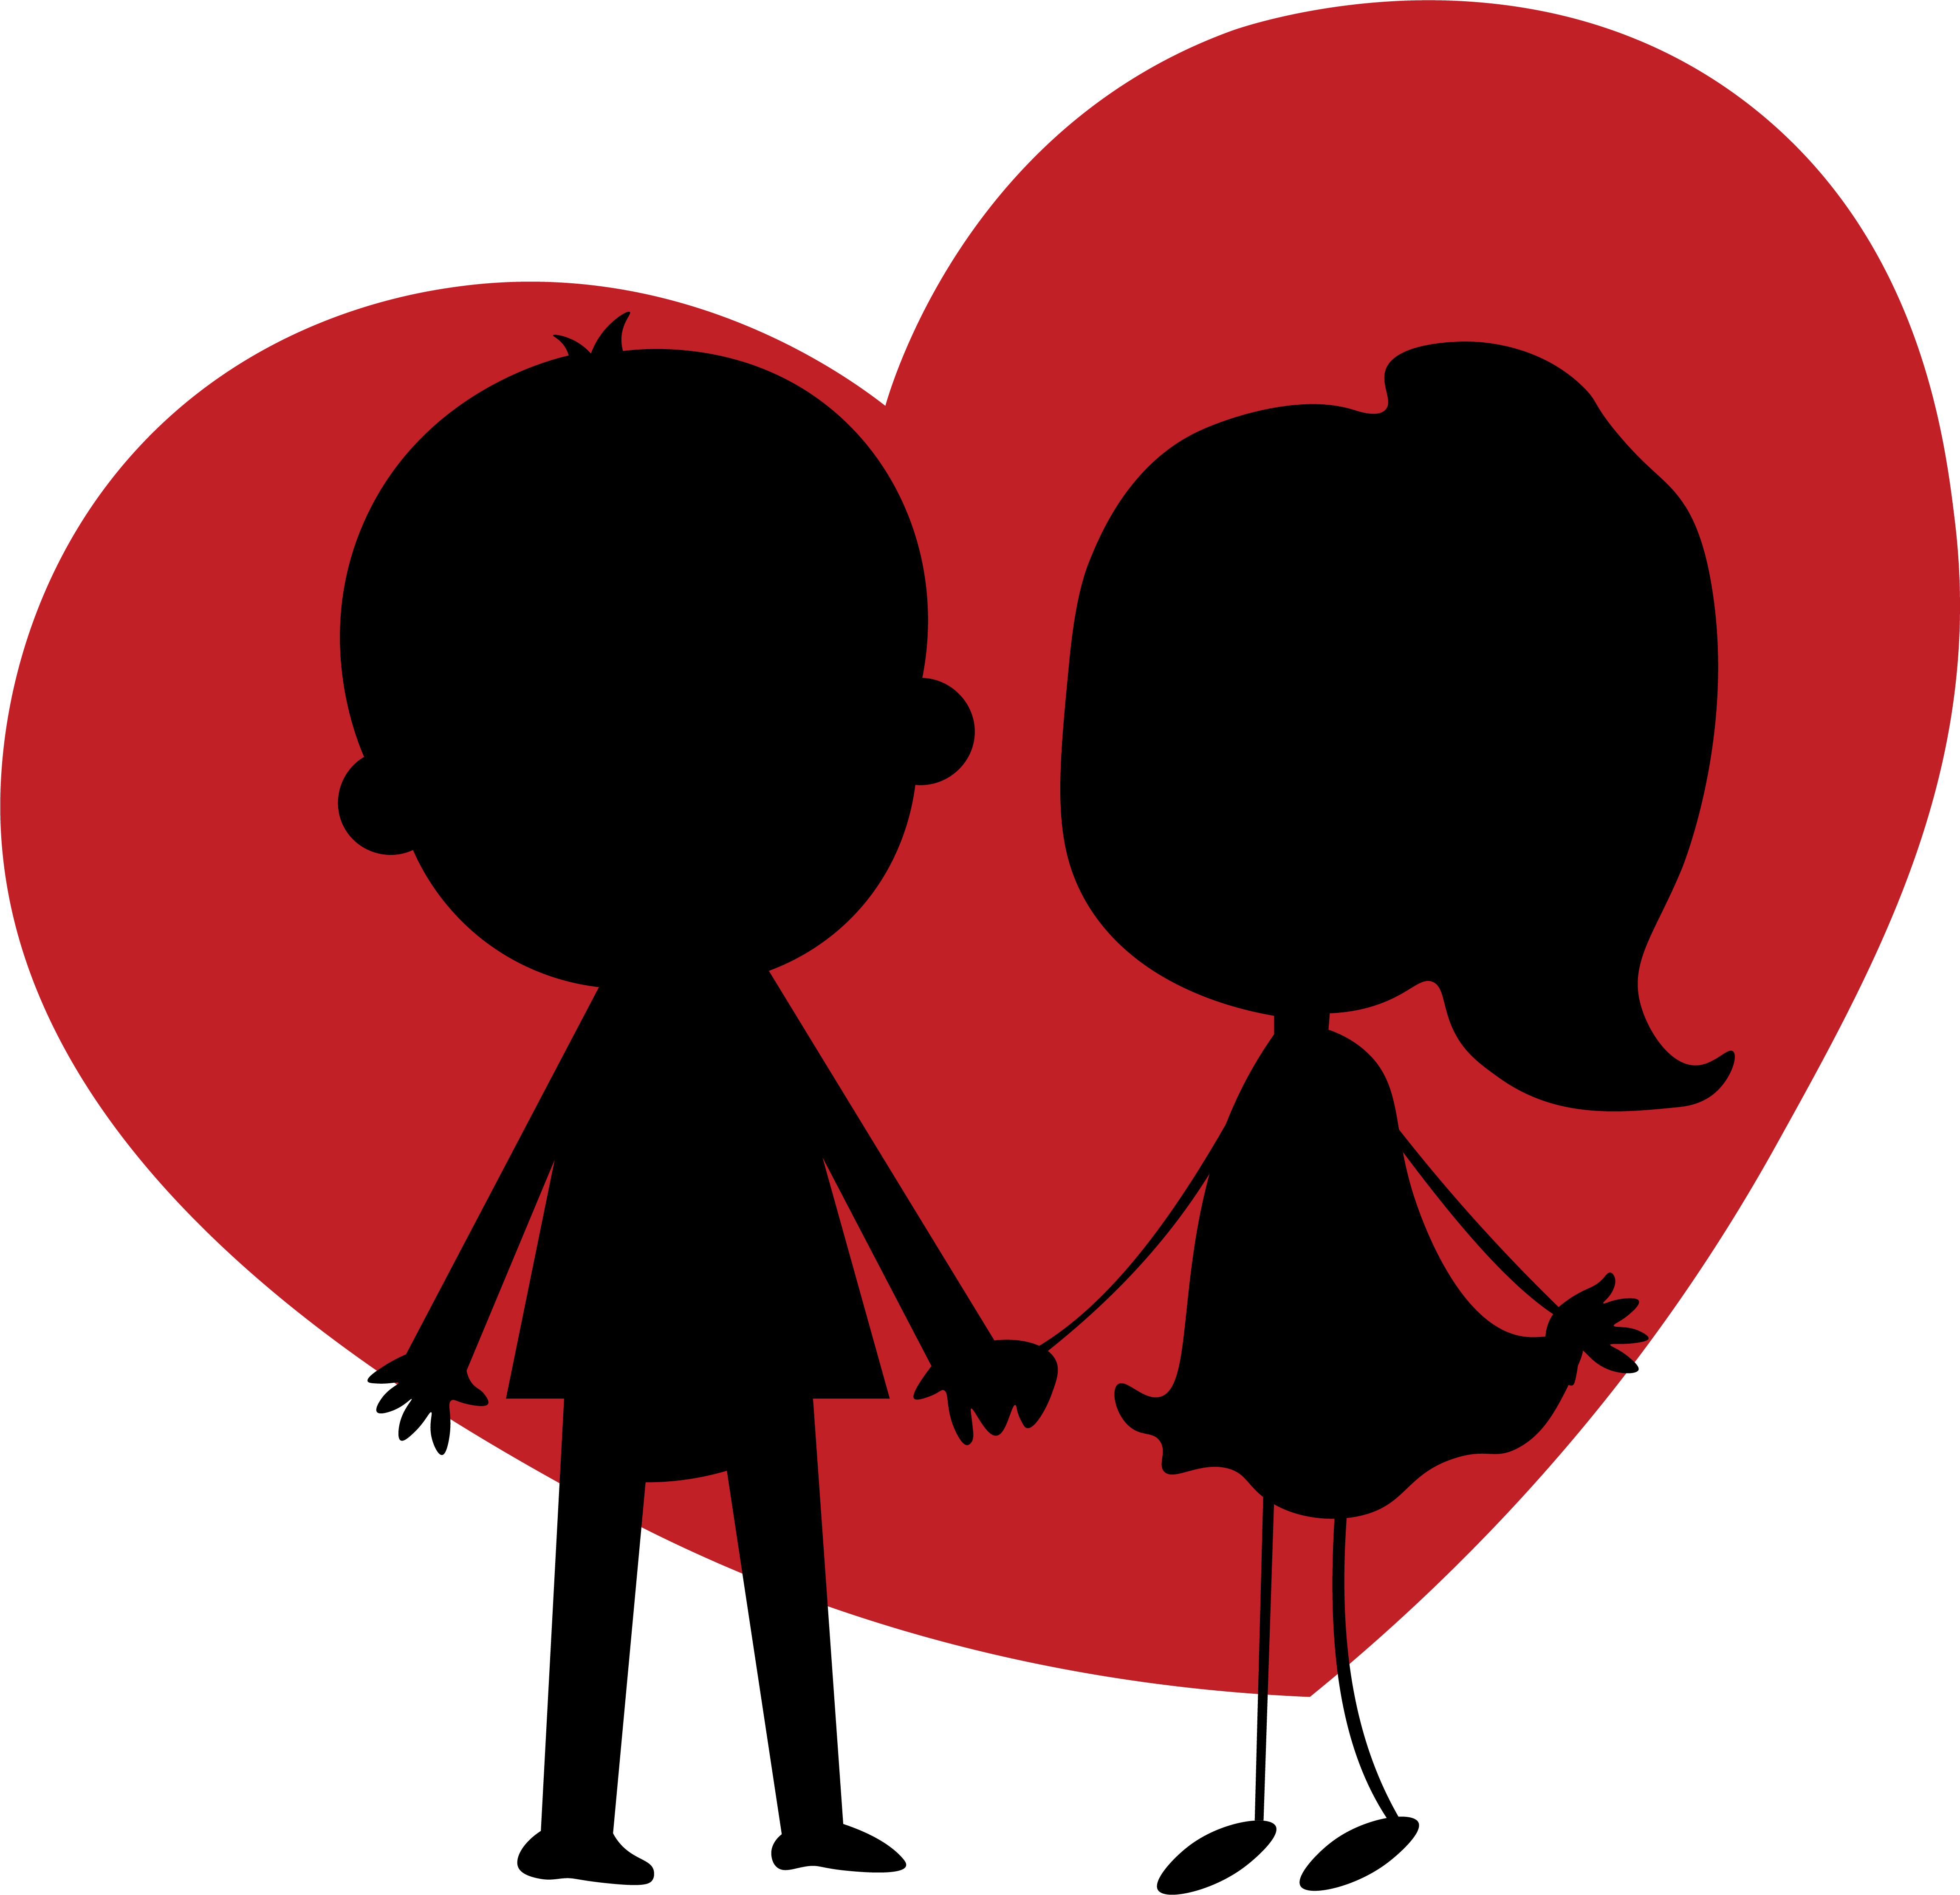 Illustration of a red heart with the silhouette of a boy and girl holding hands in front.